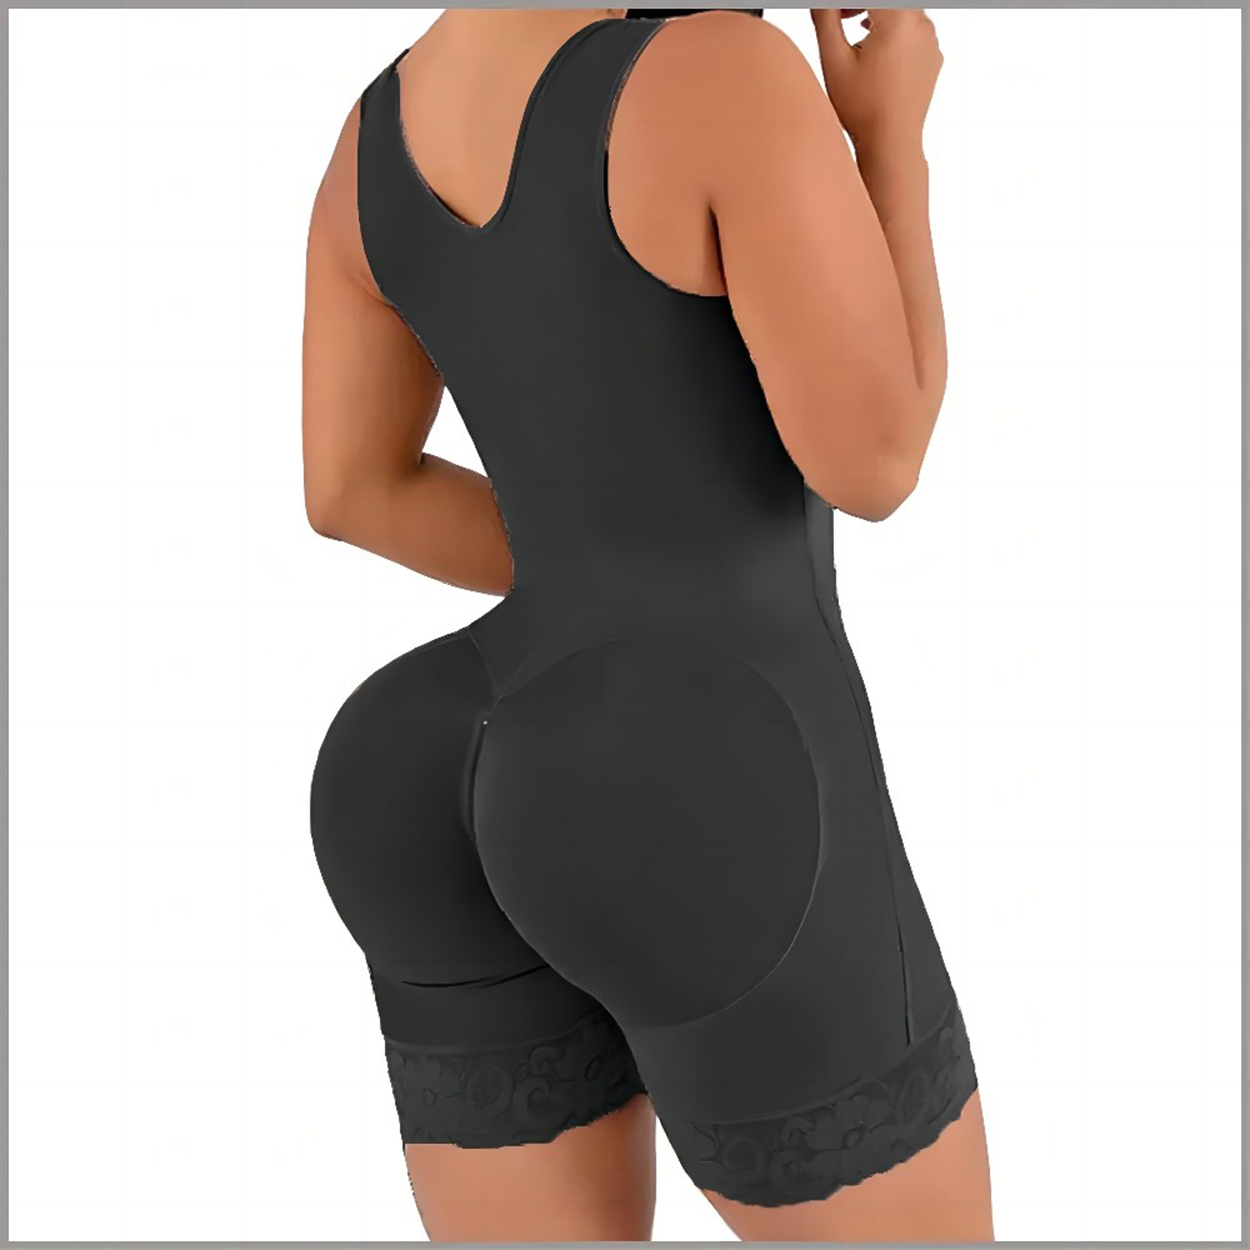 Full Body Shapewear with Zipper Closure - Slims, Shapes, and Enhances Figure for a Flawless Look - High-Waisted Tummy Control and Butt Lifting Compression Garment